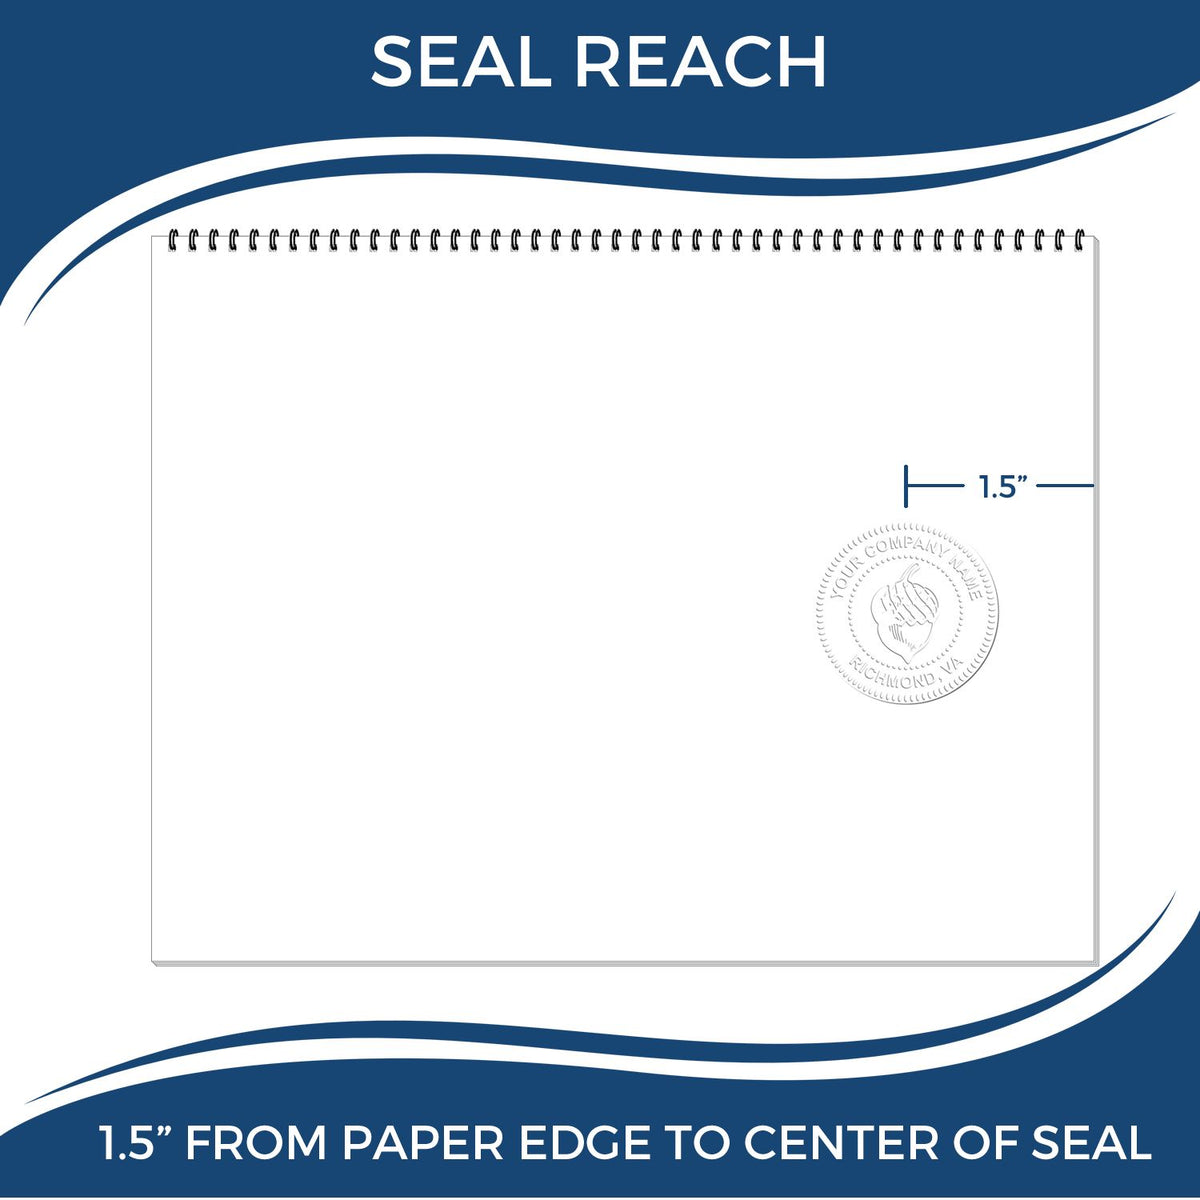 An infographic showing the seal reach which is represented by a ruler and a miniature seal image of the Gift Utah Land Surveyor Seal